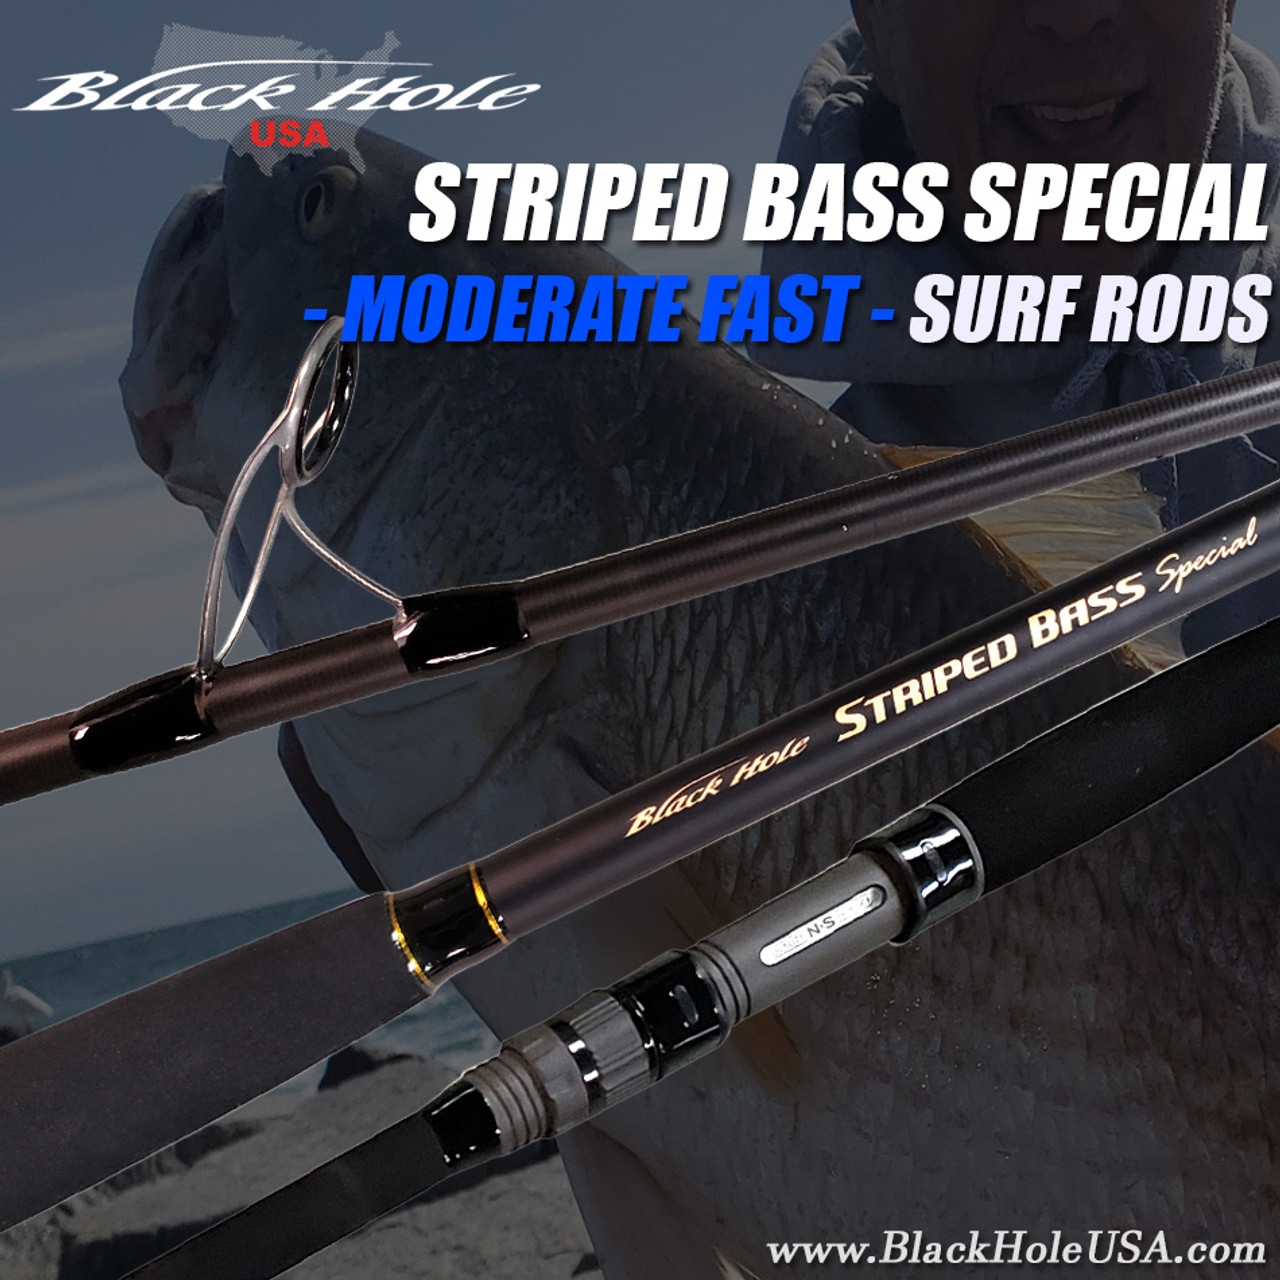 https://cdn11.bigcommerce.com/s-d32ed/images/stencil/1280w/products/796/3864/BH_STRIPED_BASS_ROD_FRONT_MODERATE_FAST_ACTION__04163.1675200492.jpg